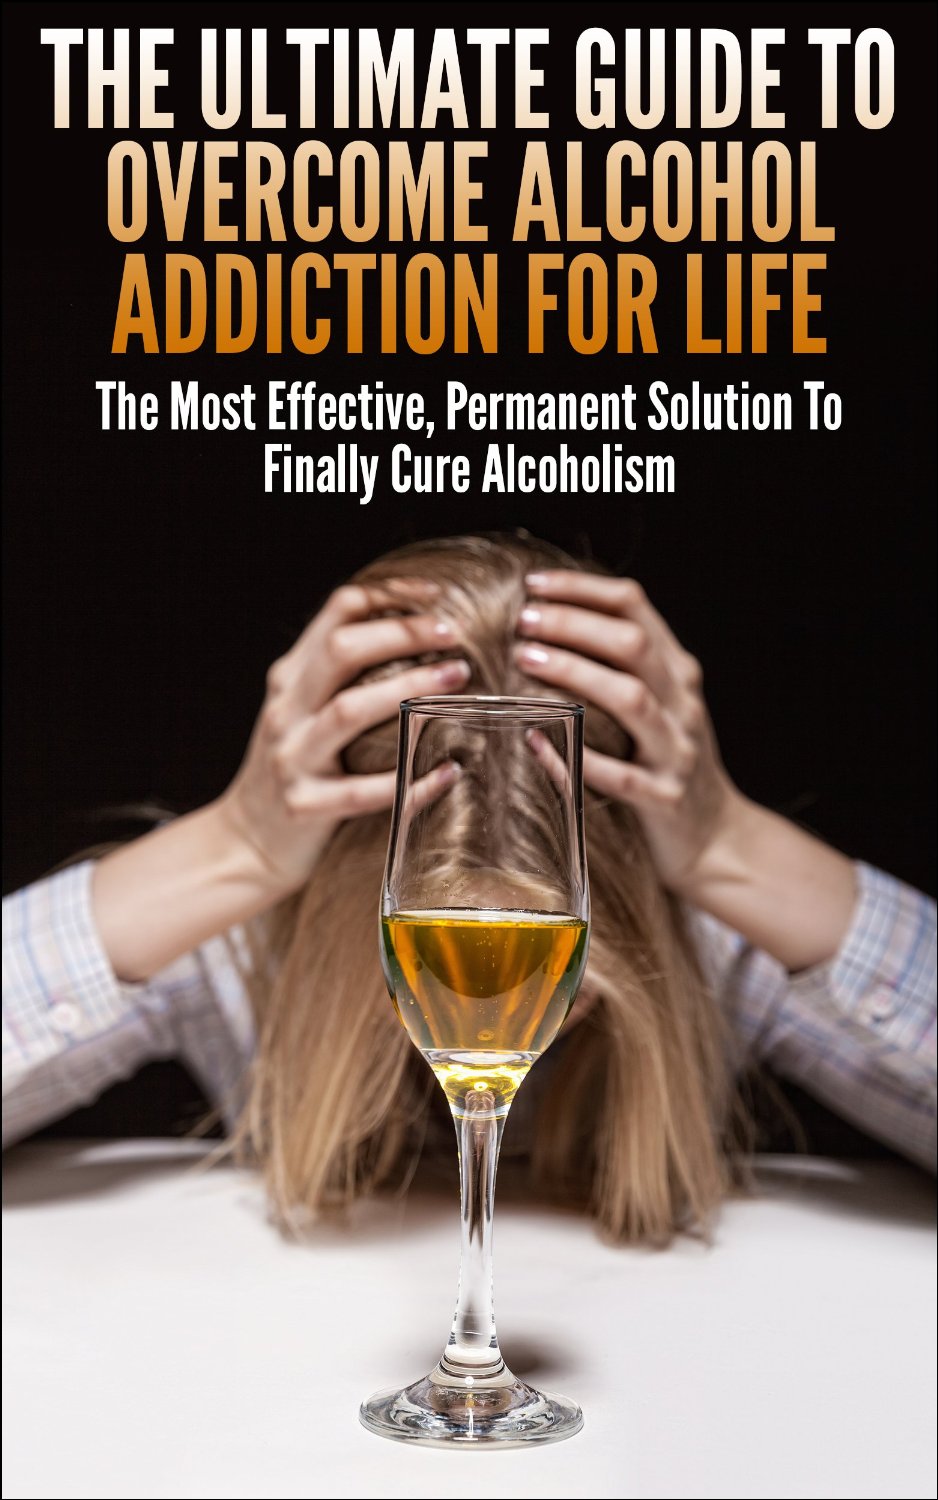 The Ultimate Guide To Overcome Alcohol Addiction For Life: The Most Effective, Permanent Solution To Finally Cure Alcoholism by John K.